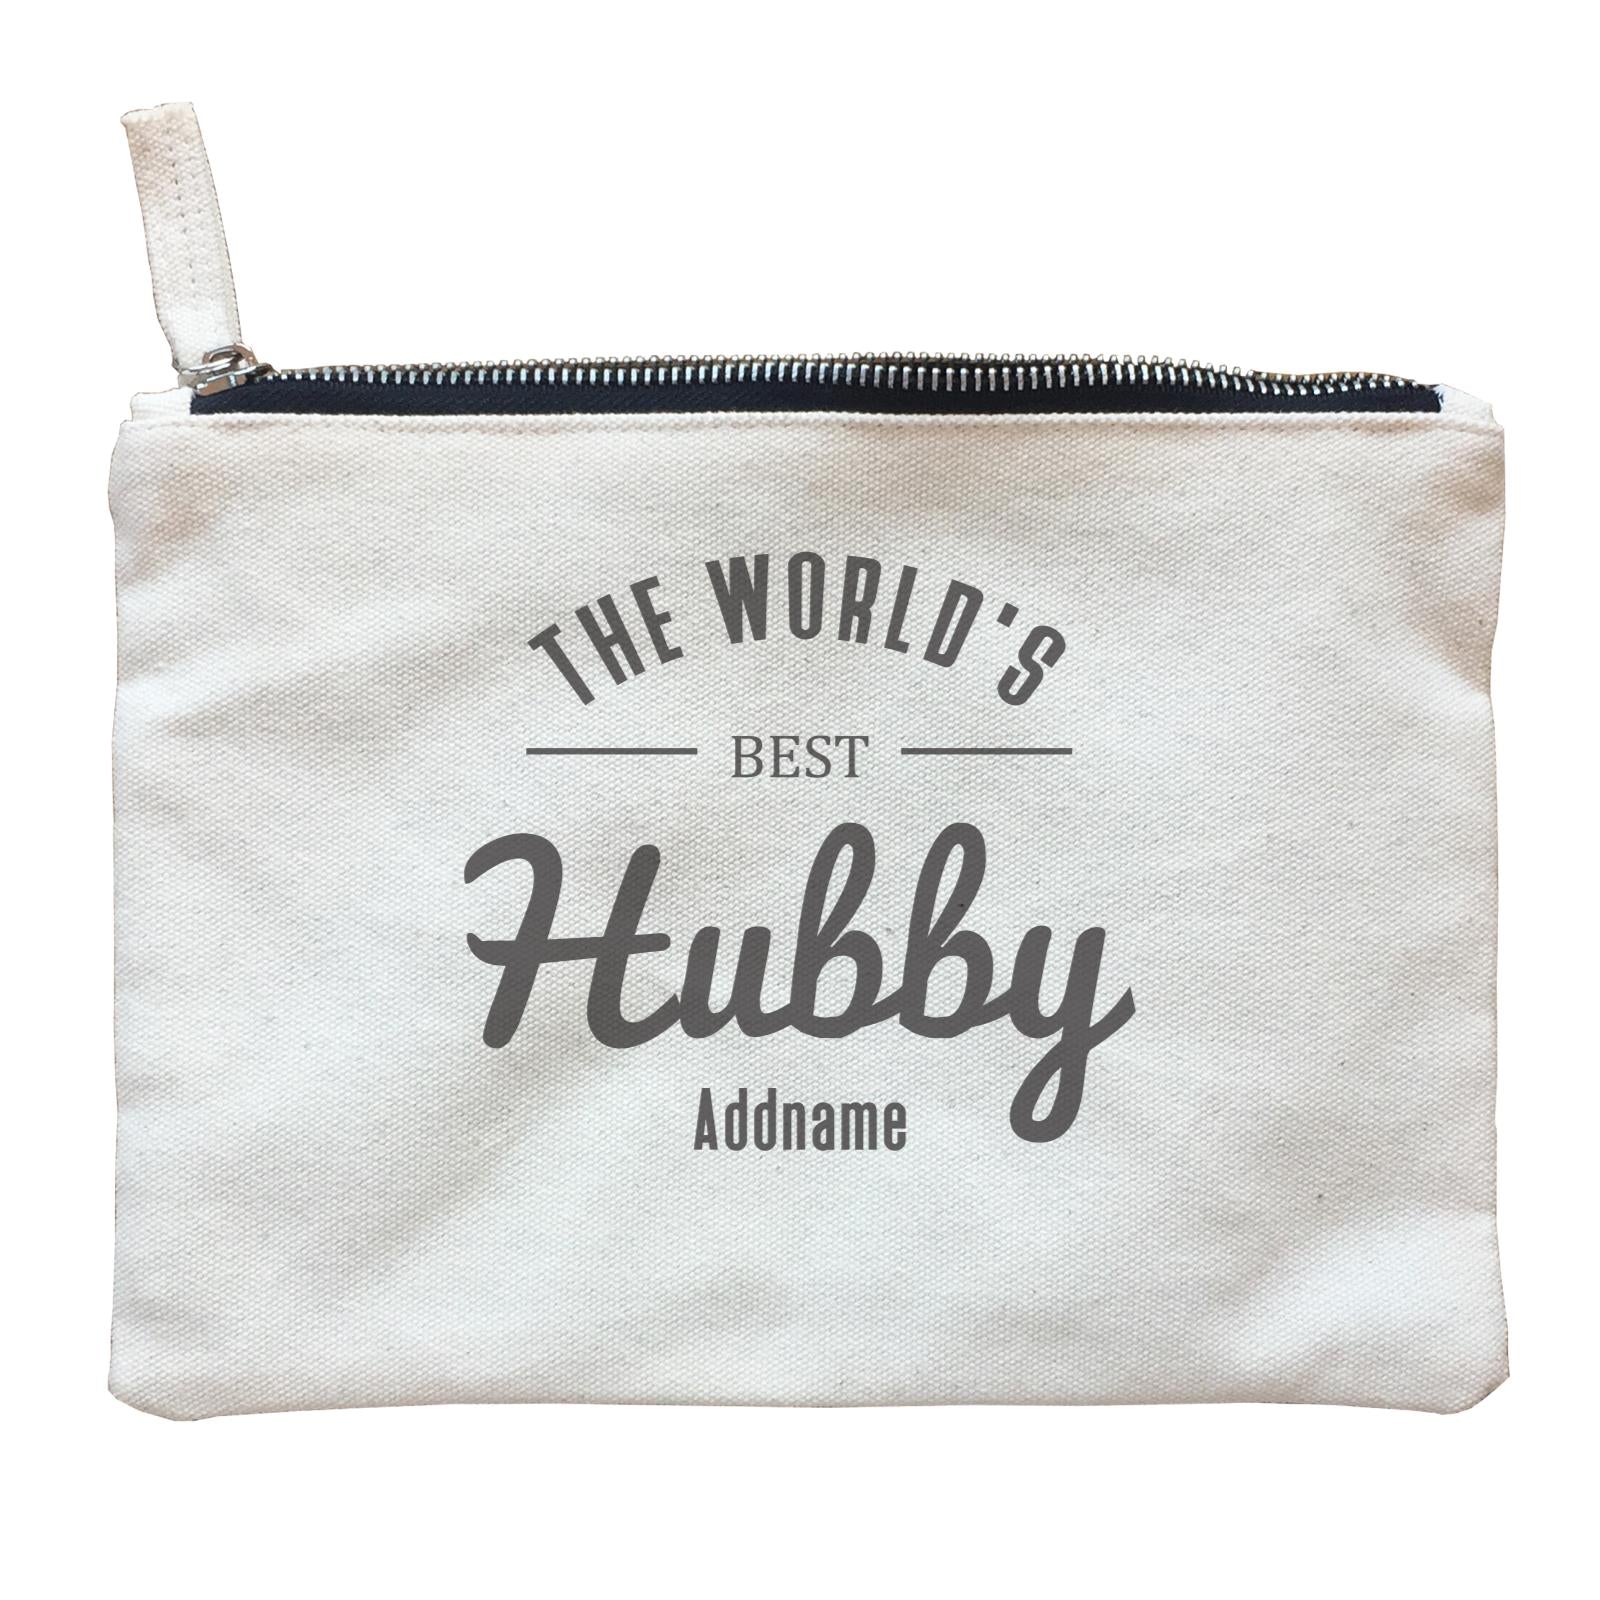 Husband and Wife The World's Best Hubby Addname Zipper Pouch